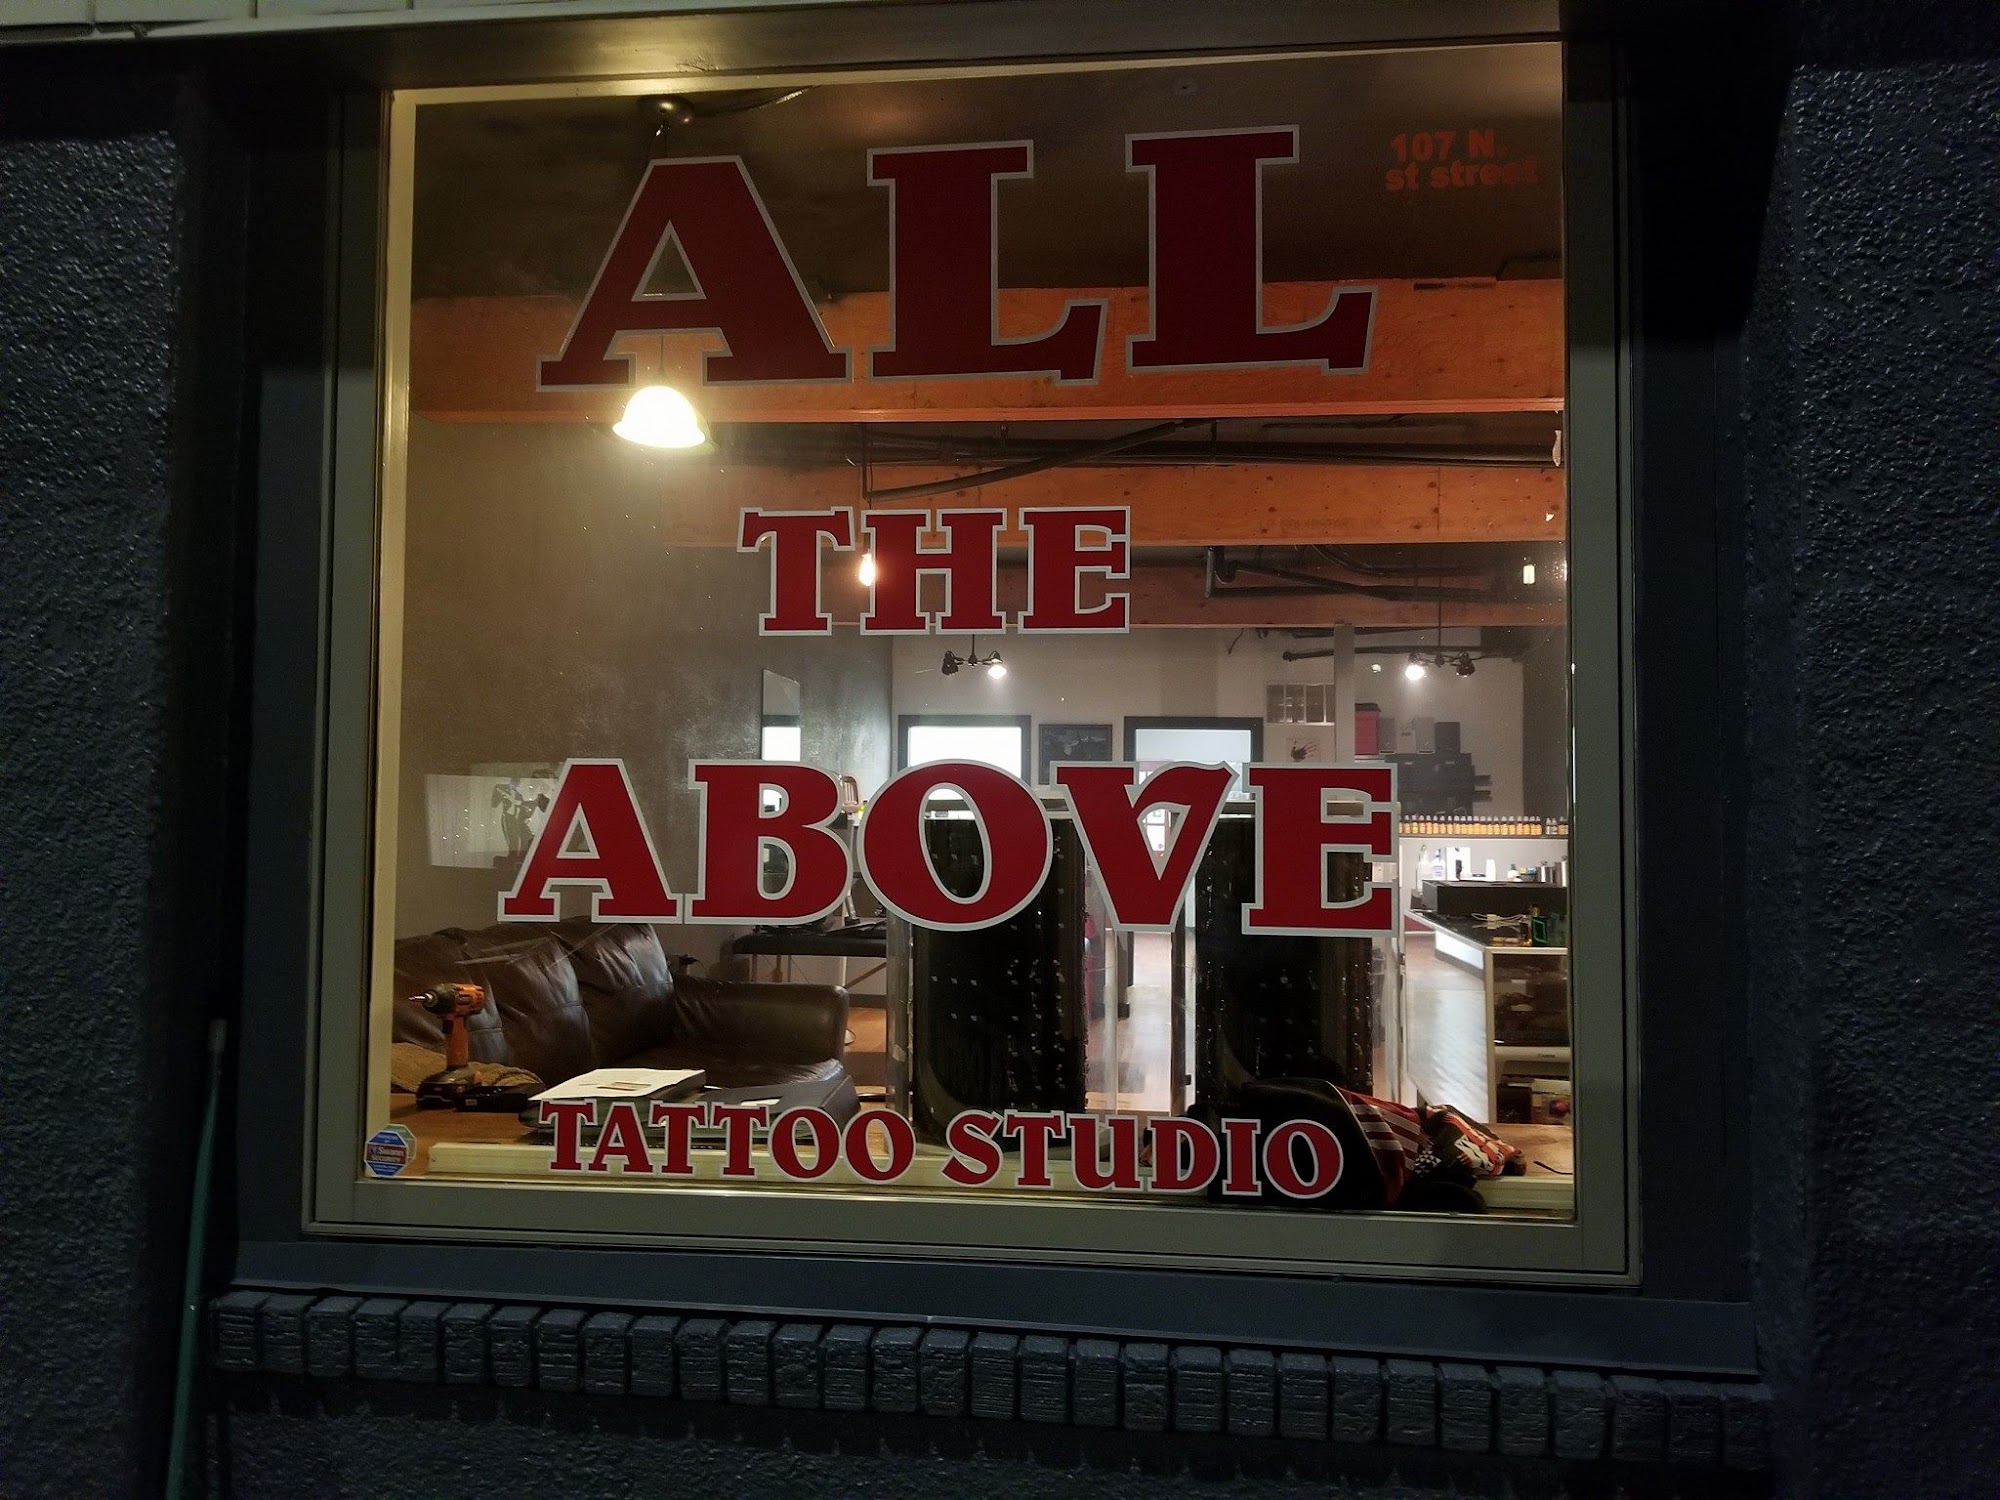 All The Above Tattoo Studio 102 N 1st St, Abbotsford Wisconsin 54405